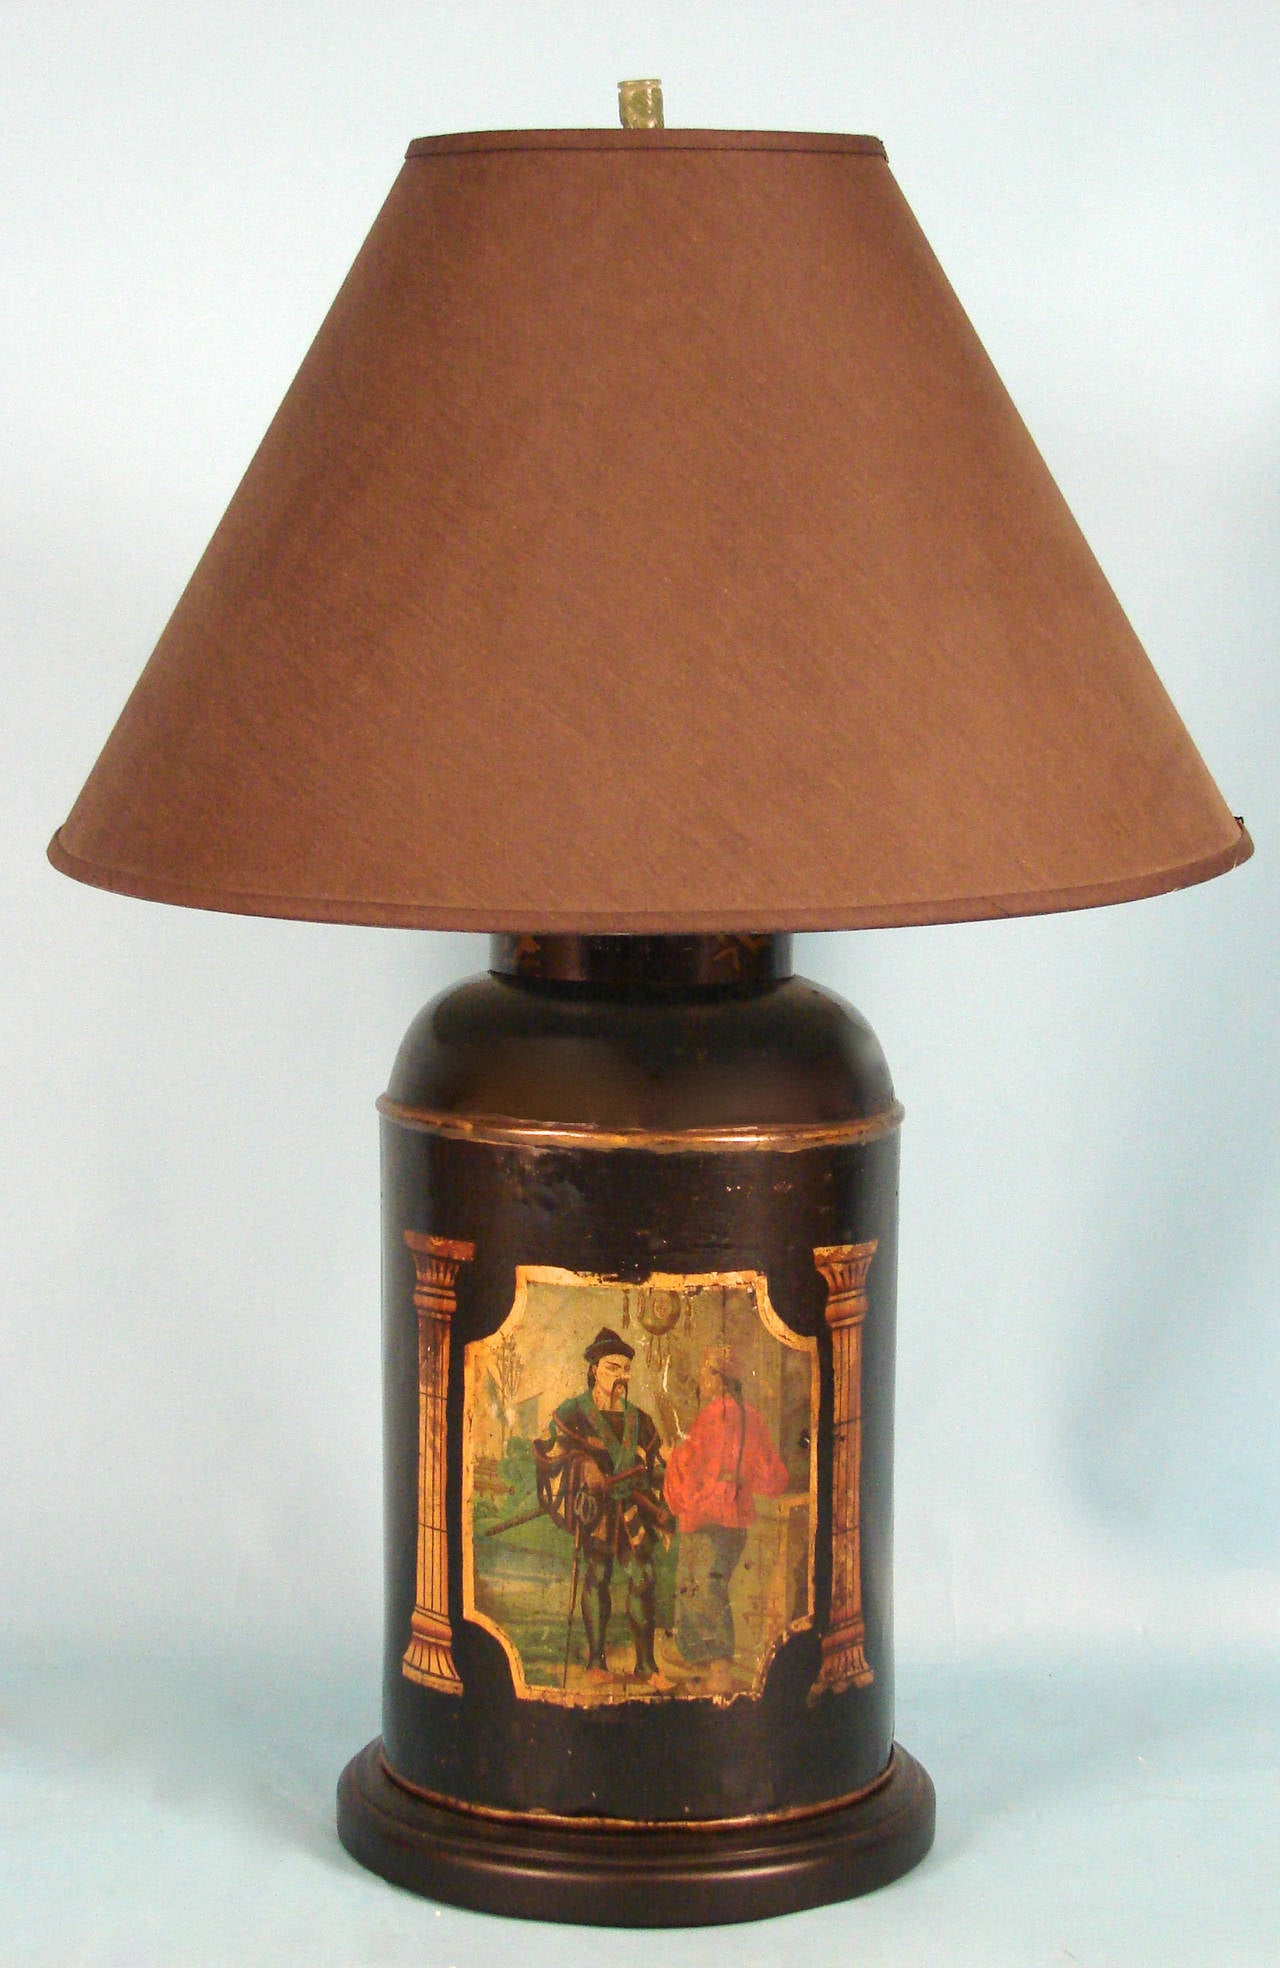 A Chinese export black and gilt decorated tole tea canister depicting two courtly gentlemen flanked by columns, the opposite side with stylized Chinese characters, now mounted with a wooden base and electrified for use as a lamp, circa 1880.